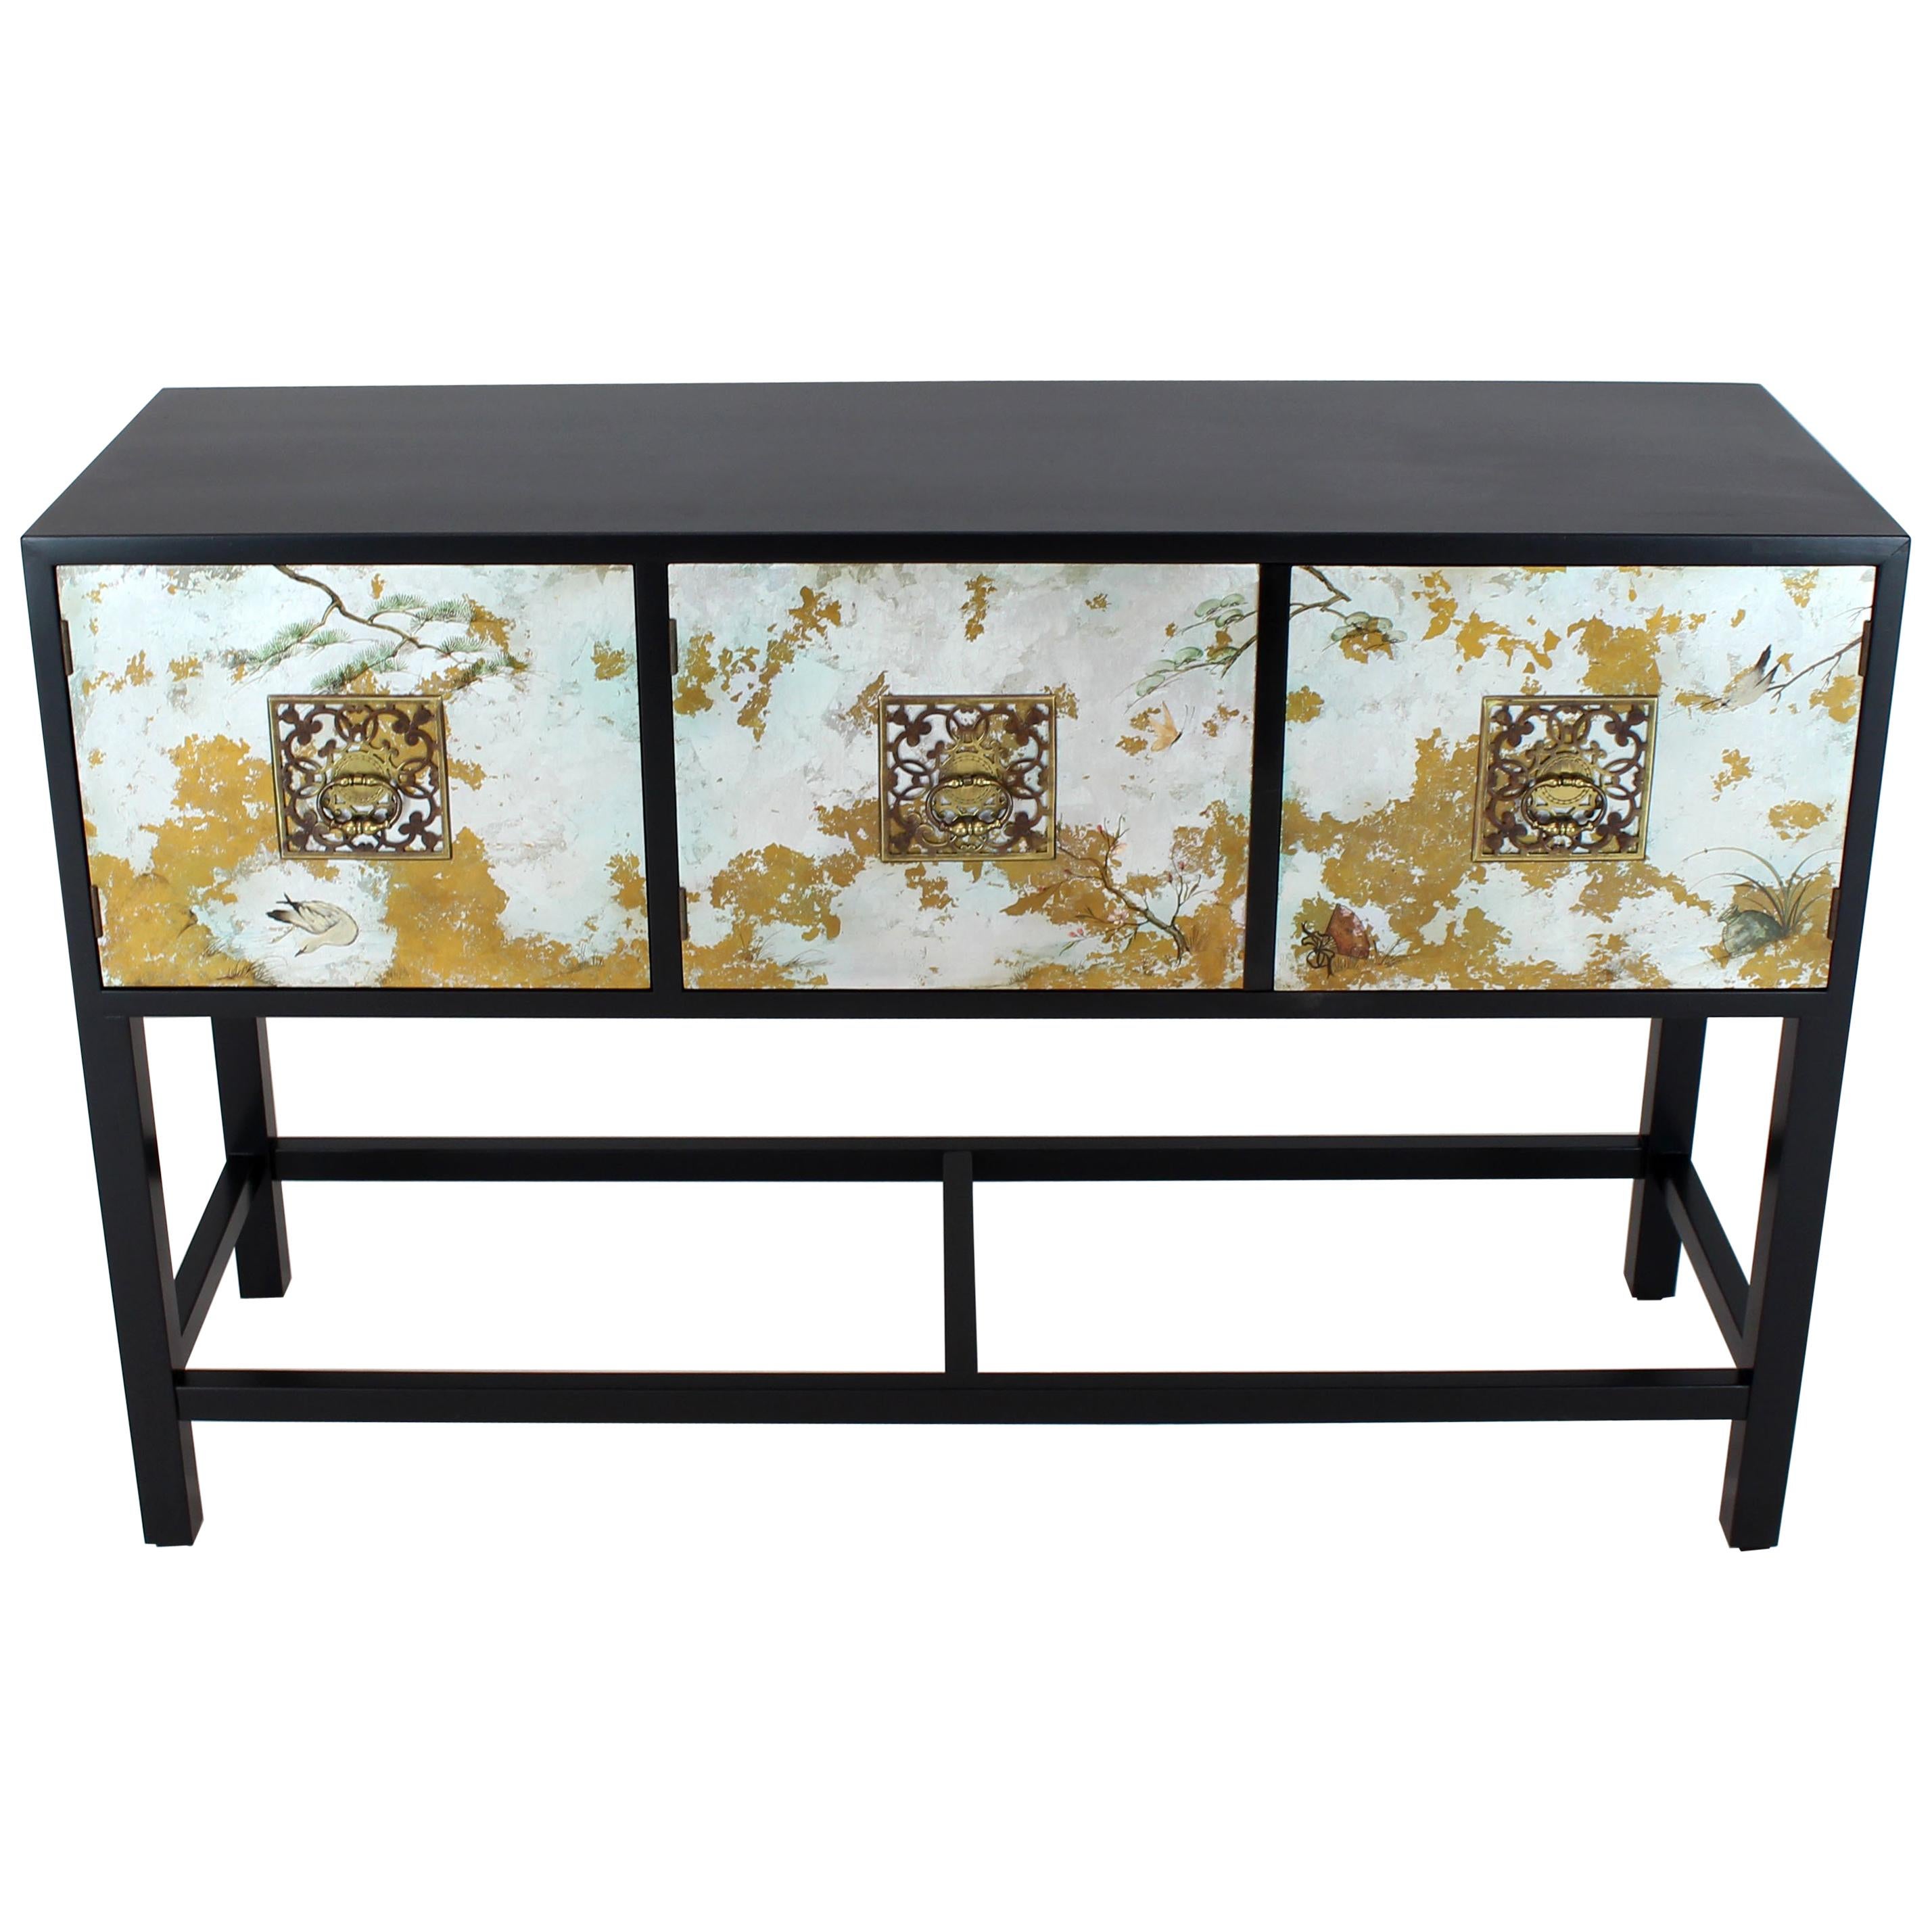 Black Lacquer Painted Decorated Three Doors Small Credenza Brass Pulls